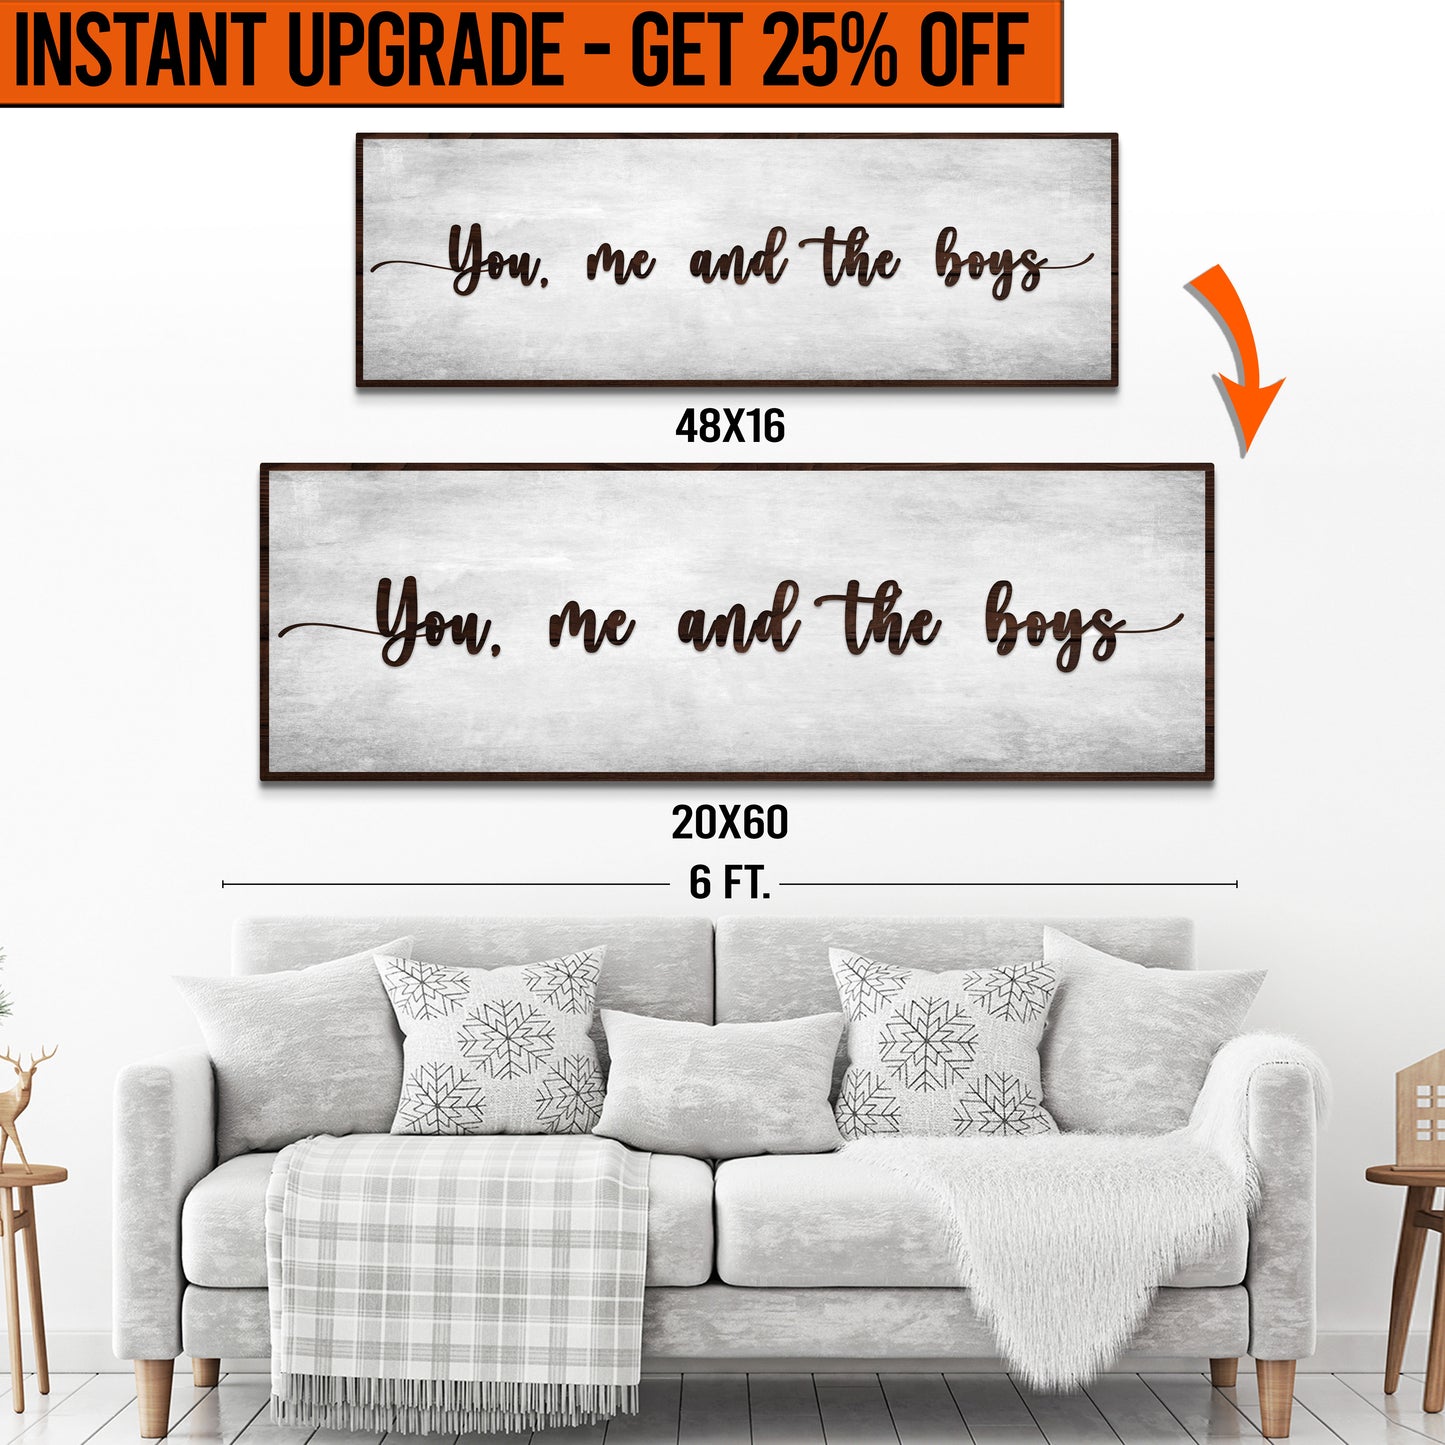 Upgrade Your 16x48 Inches 'You Me and the Boys' (Style 3) Canvas To 20x60 Inches